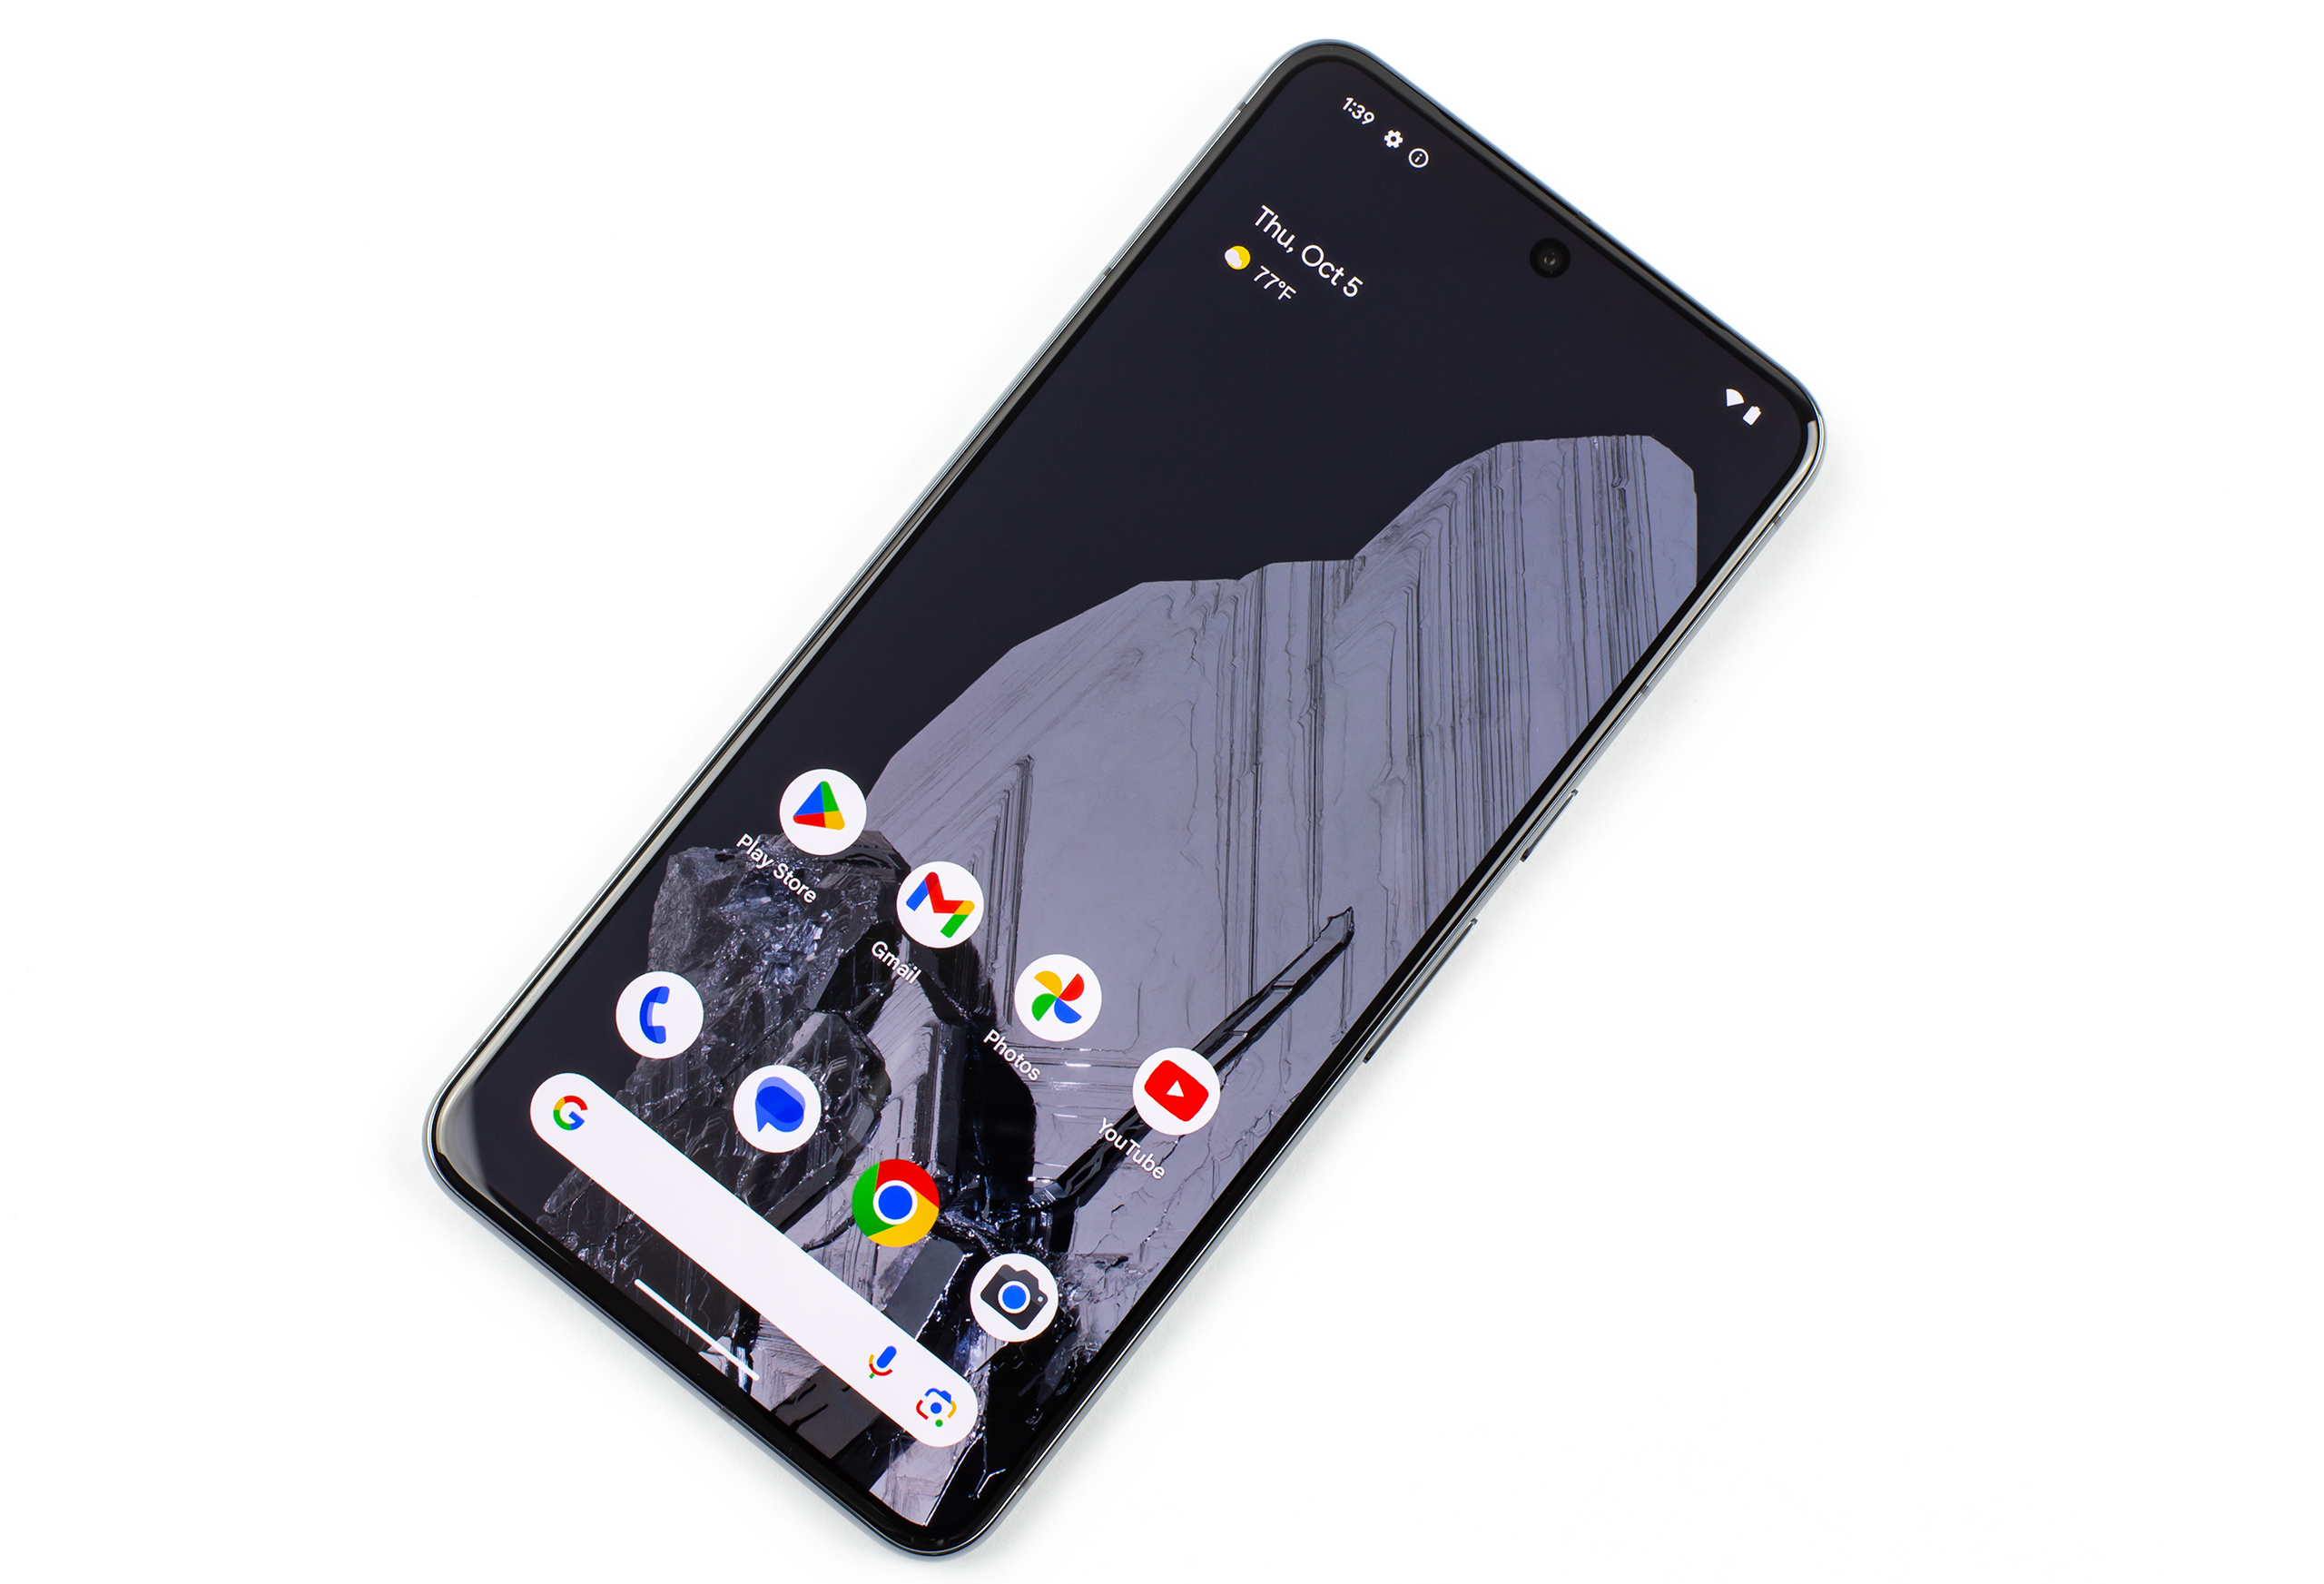 Google Pixel 6 Pro review: A top-tier Android phone